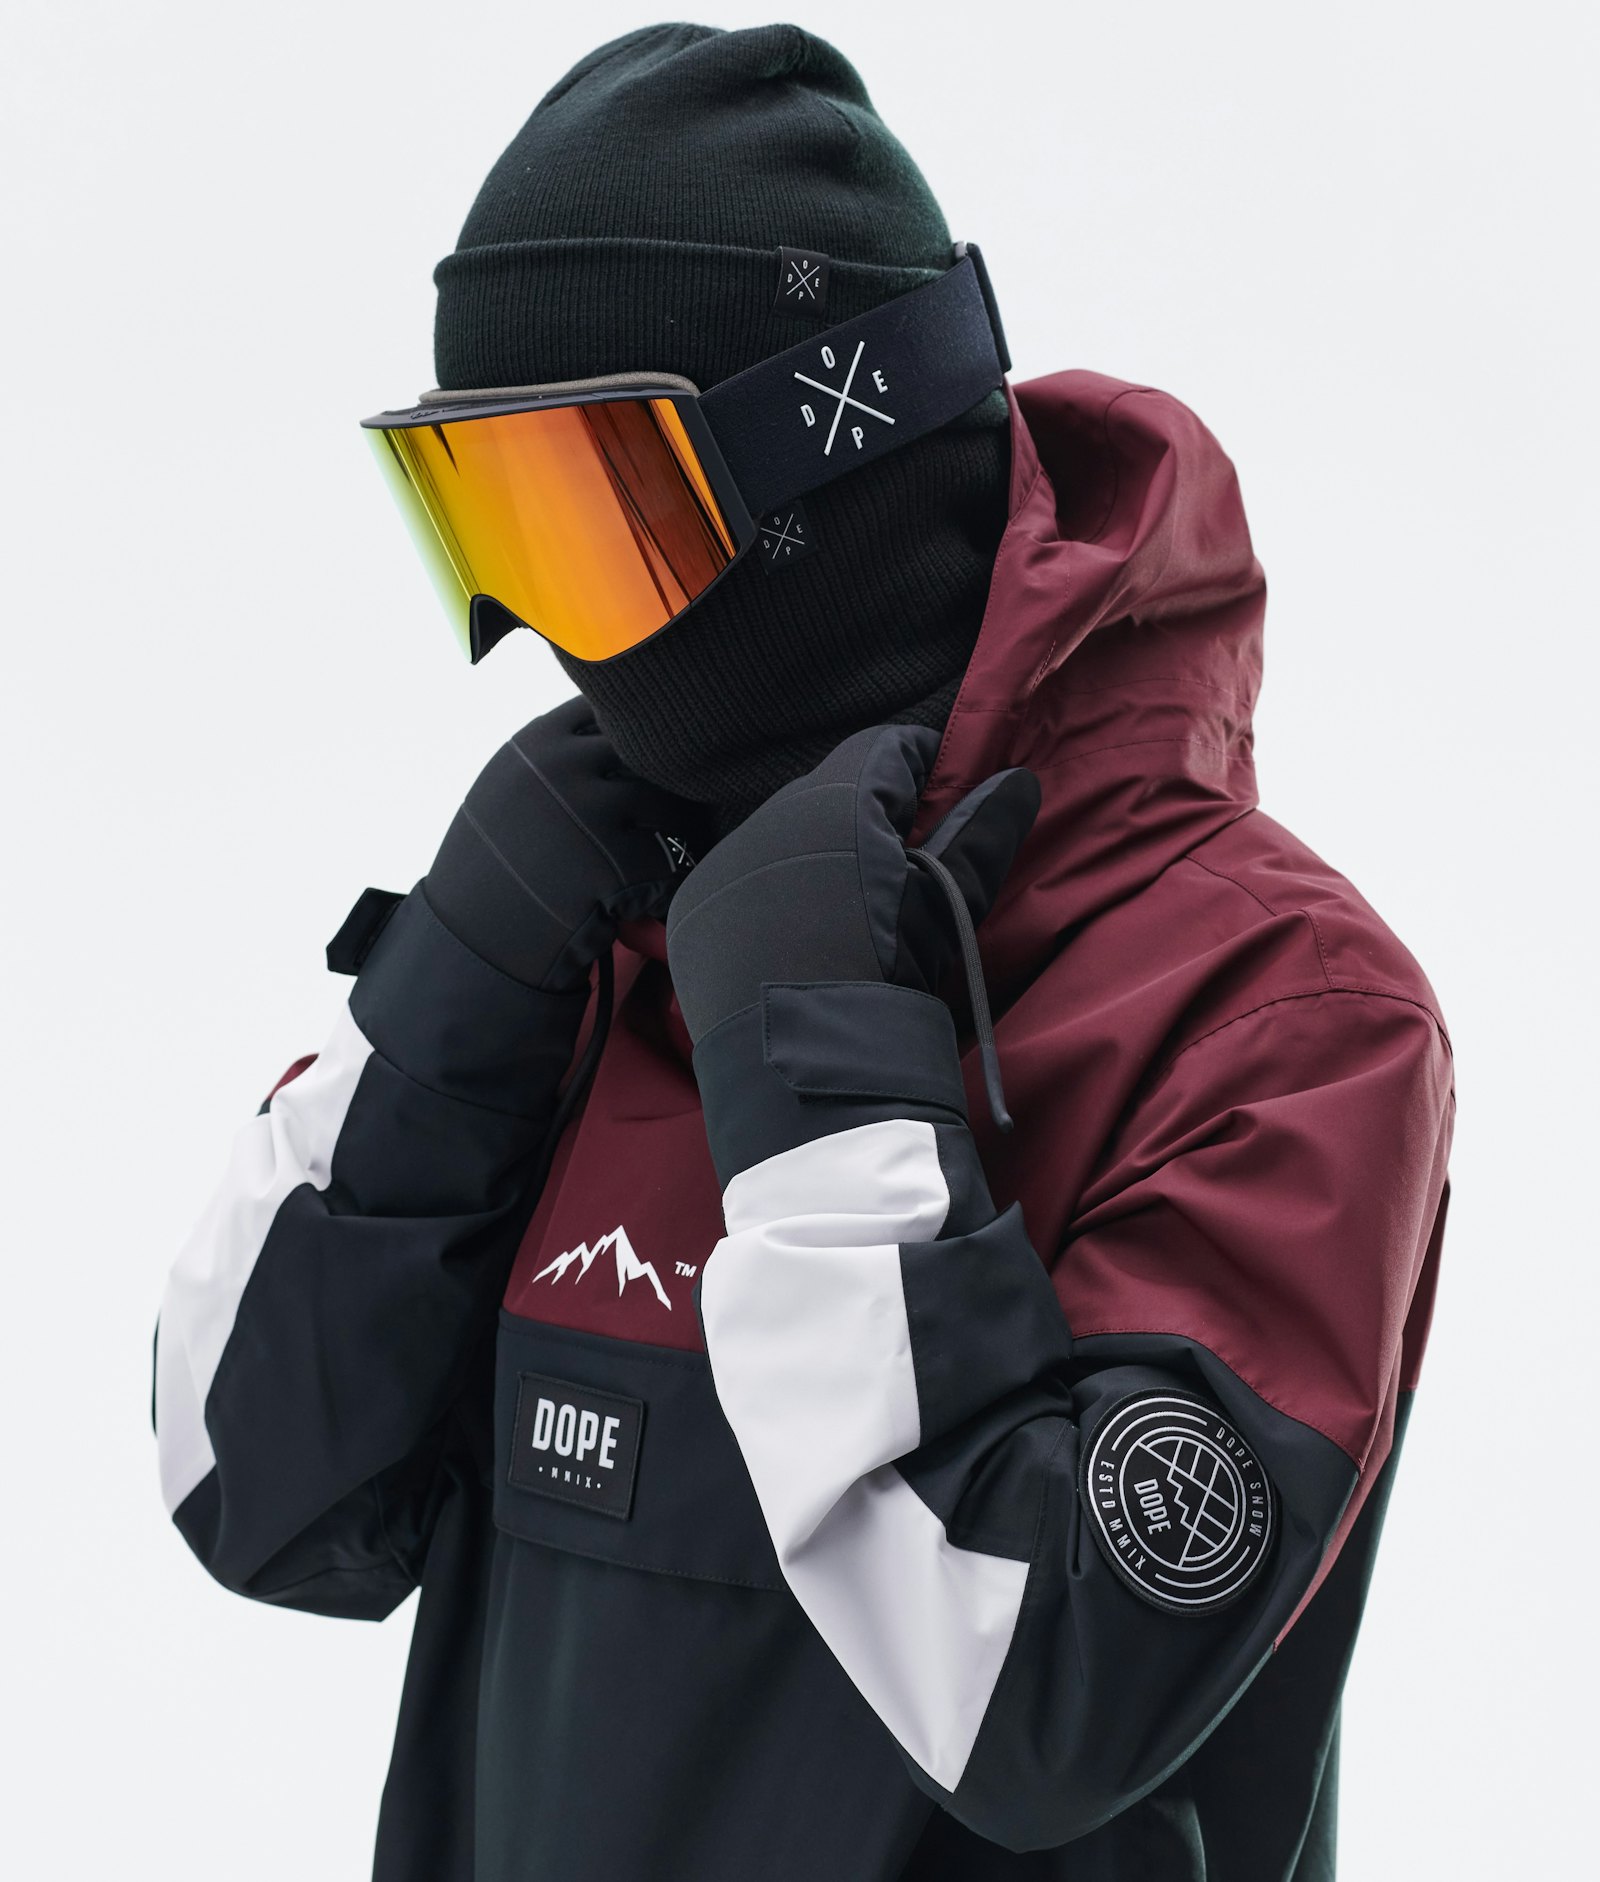 Dope Blizzard 2020 Snowboard Jacket Men Limited Edition Burgundy Multicolour, Image 2 of 8